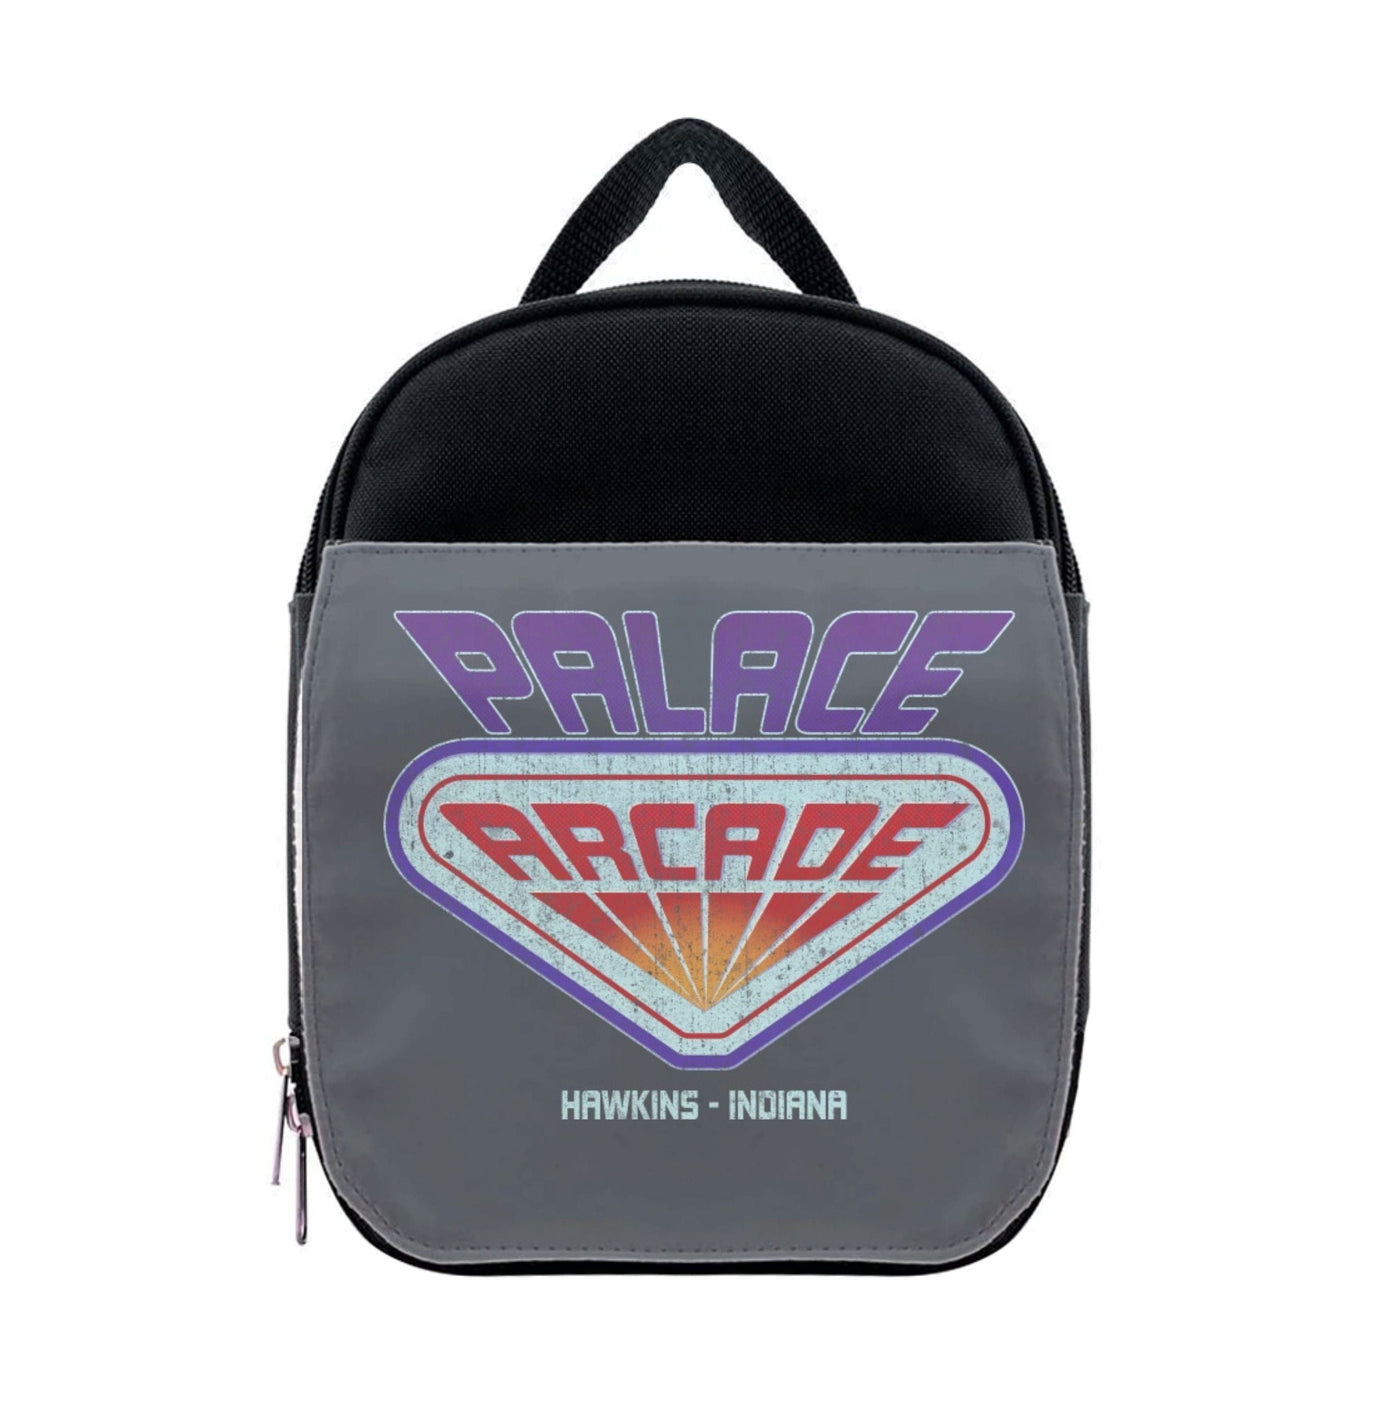 Palace Arcade - Stranger Things Lunchbox